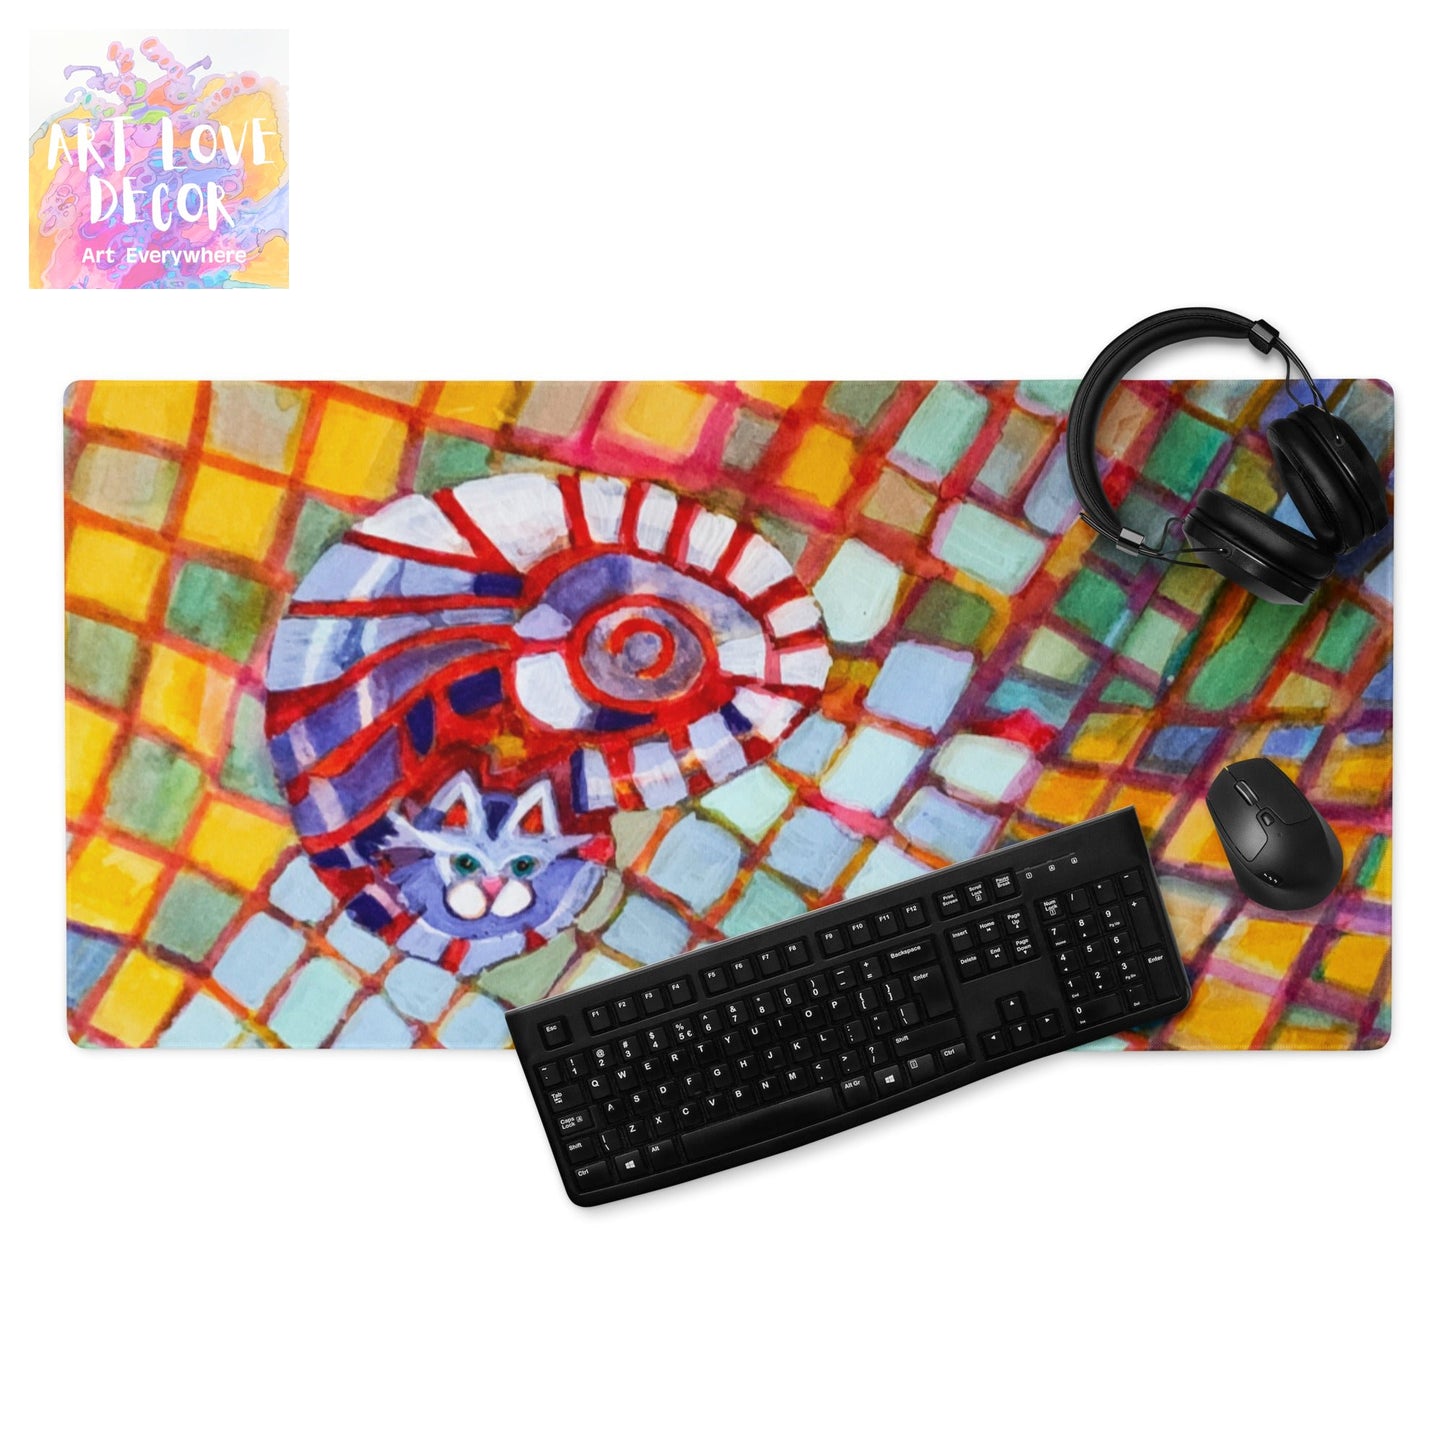 Checkers Cat Gaming mouse pad - Art Love Decor